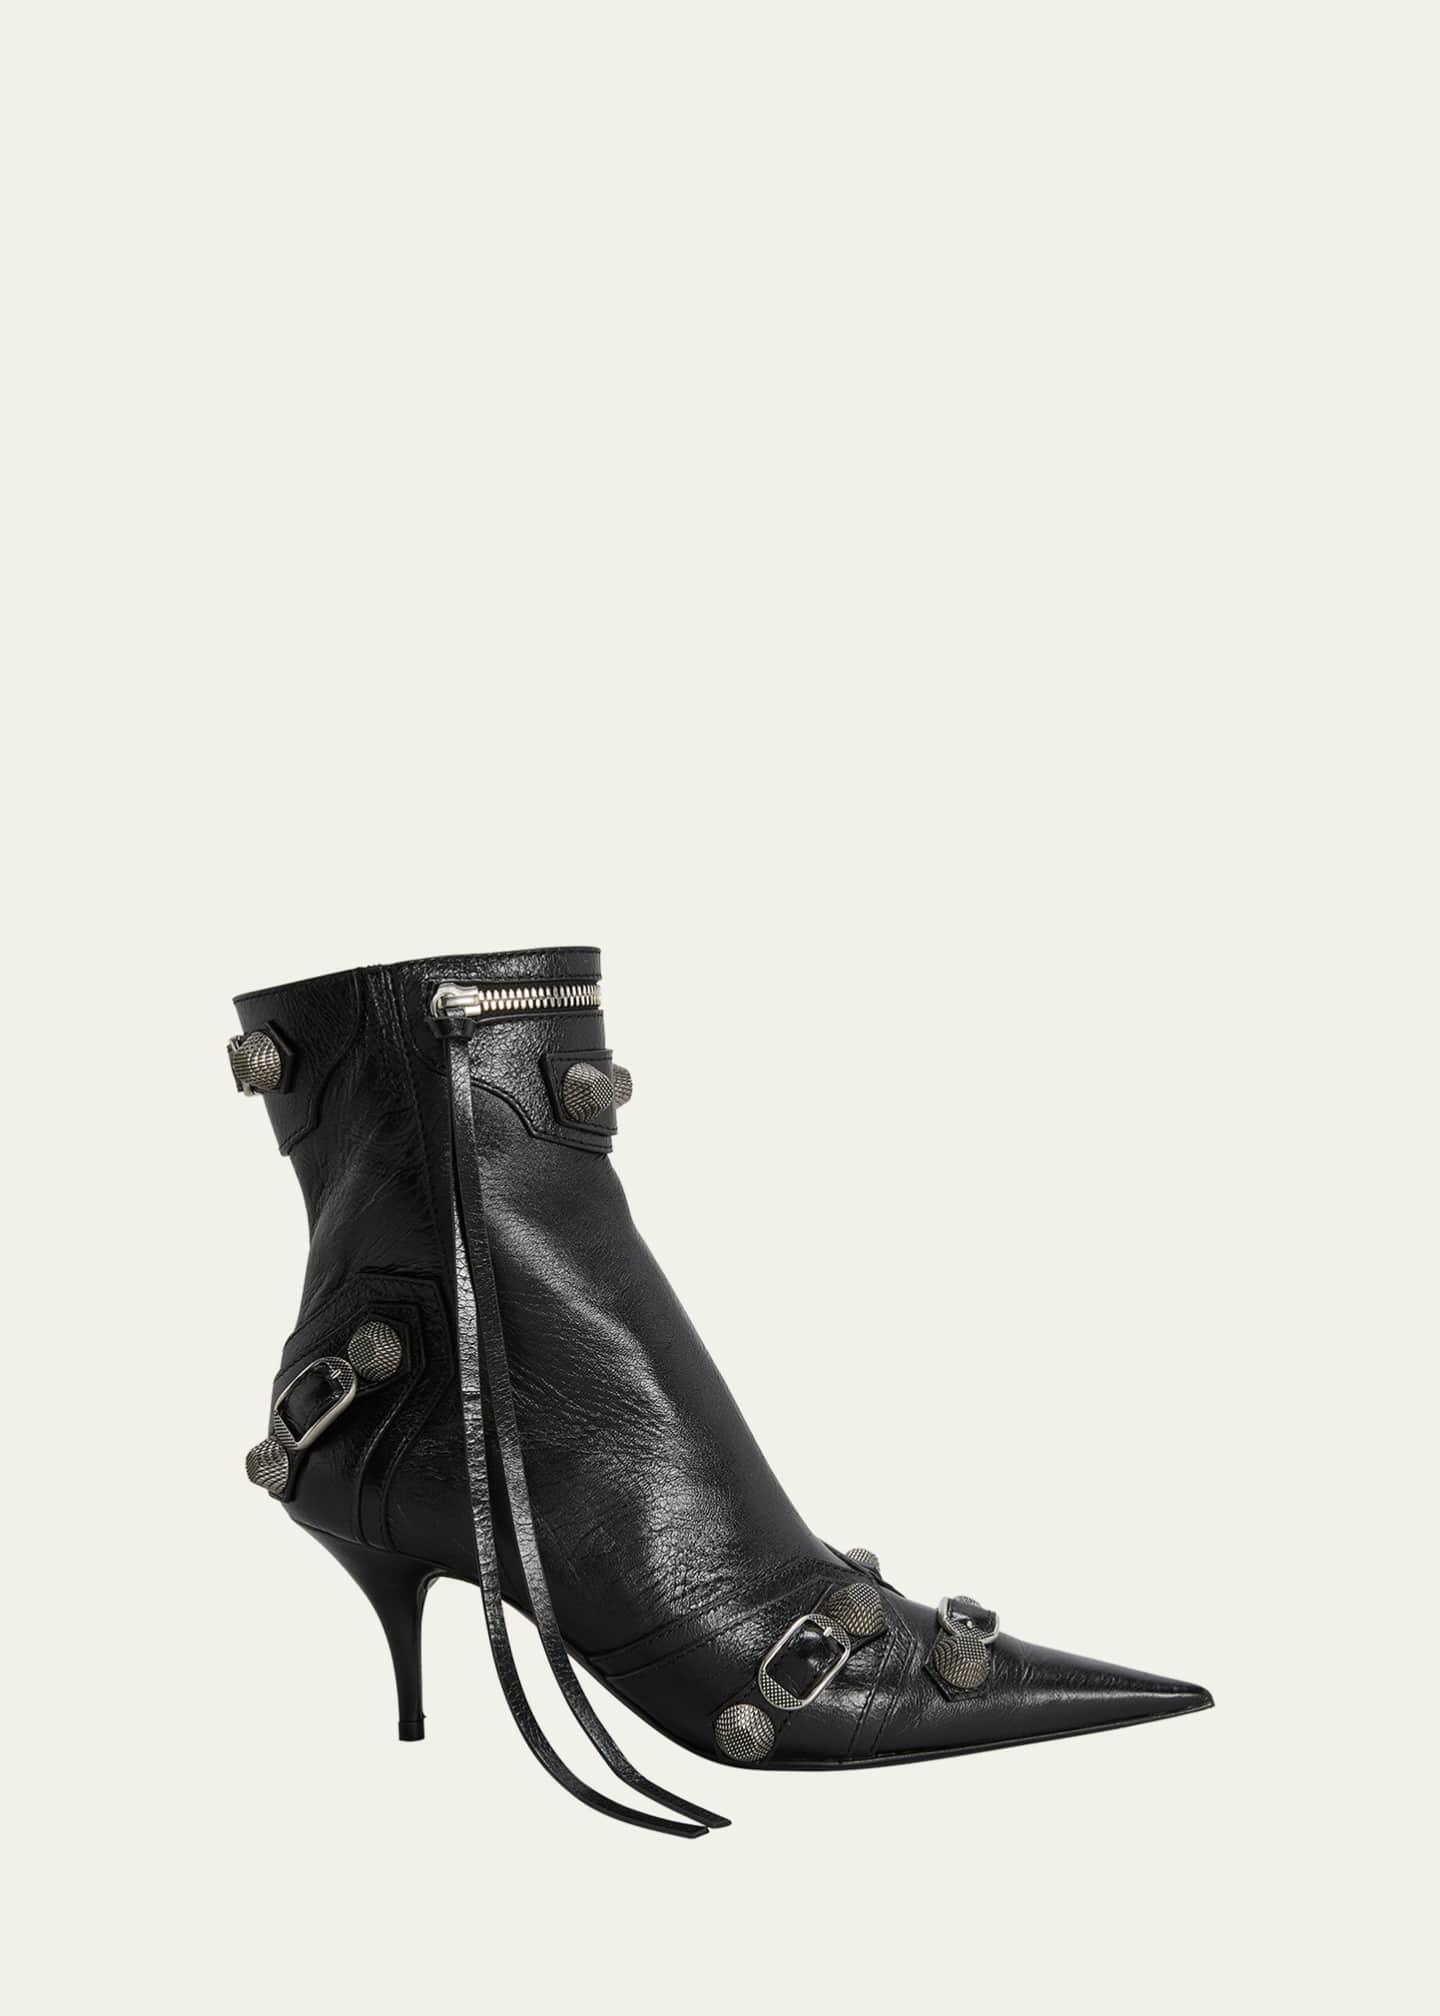 Balenciaga Cagole Lambskin Buckle Zip Ankle Booties Image 1 of 3